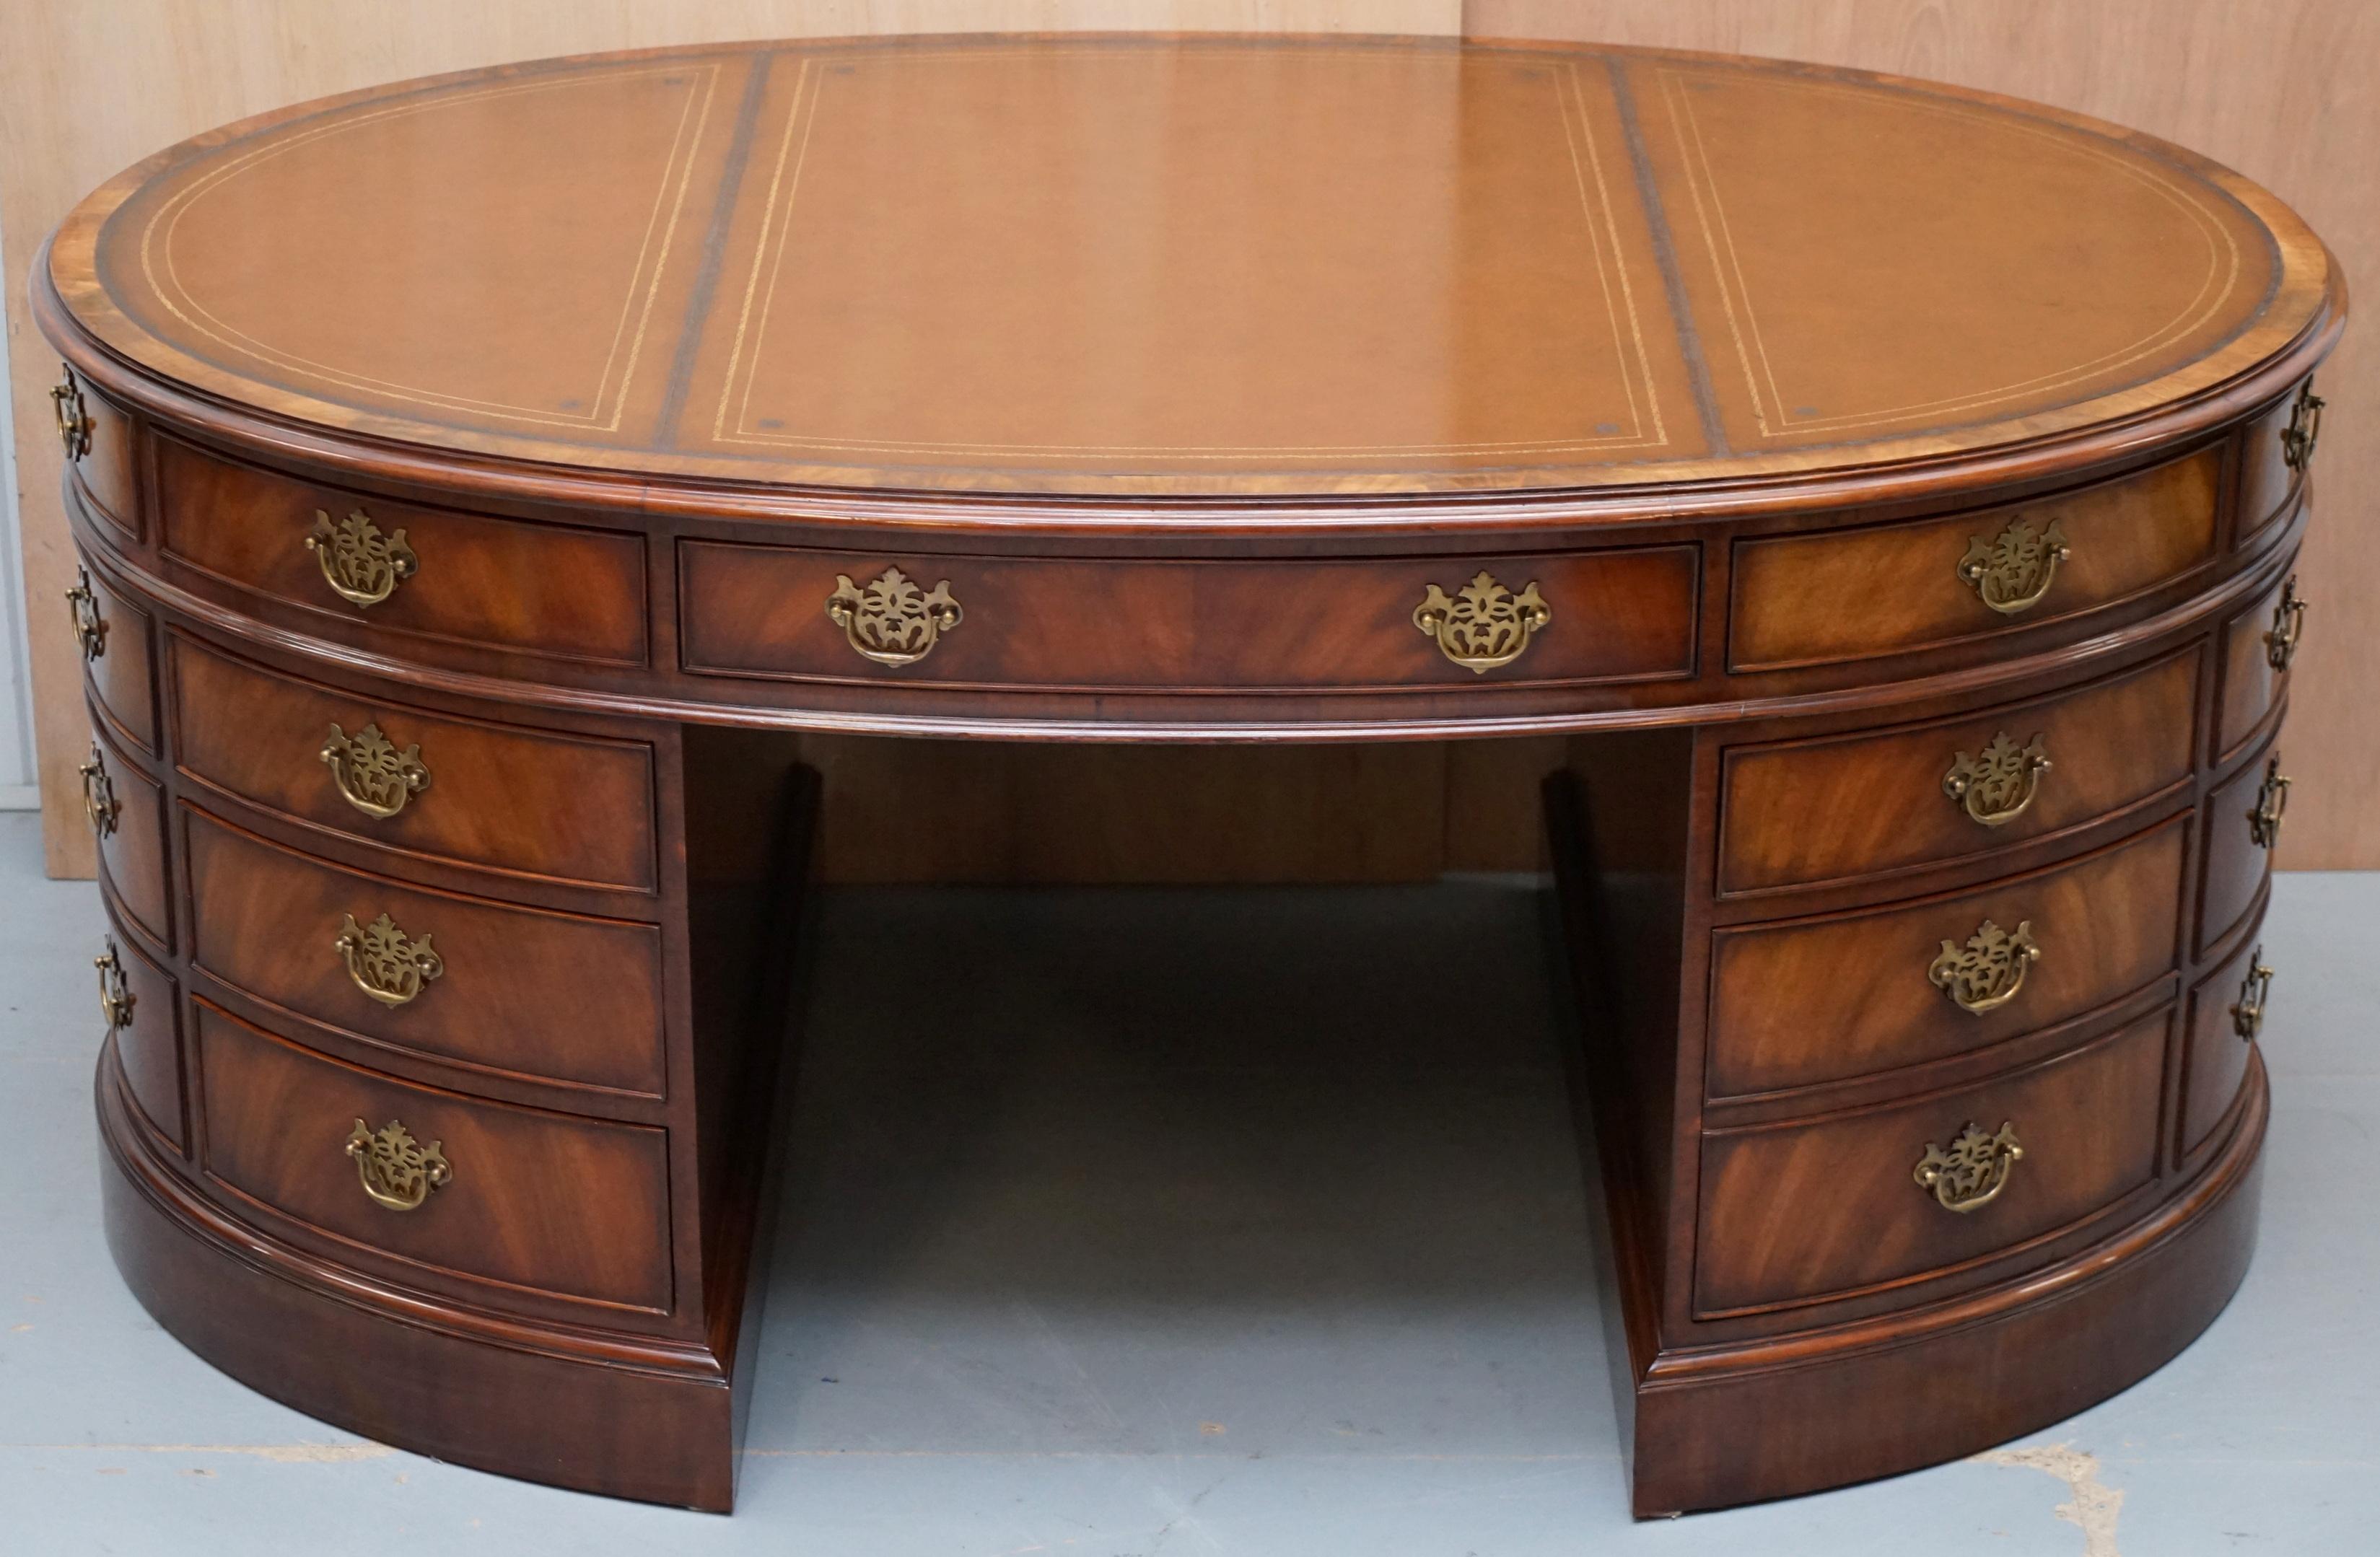 We are delighted to this absolutely stunning Crotch Mahogany Oval Partners desk with brass handles and gold leaf embossed antique Brown Leather writing surface 

A truly exquisite piece, the desk is double sided so designed for two people to share